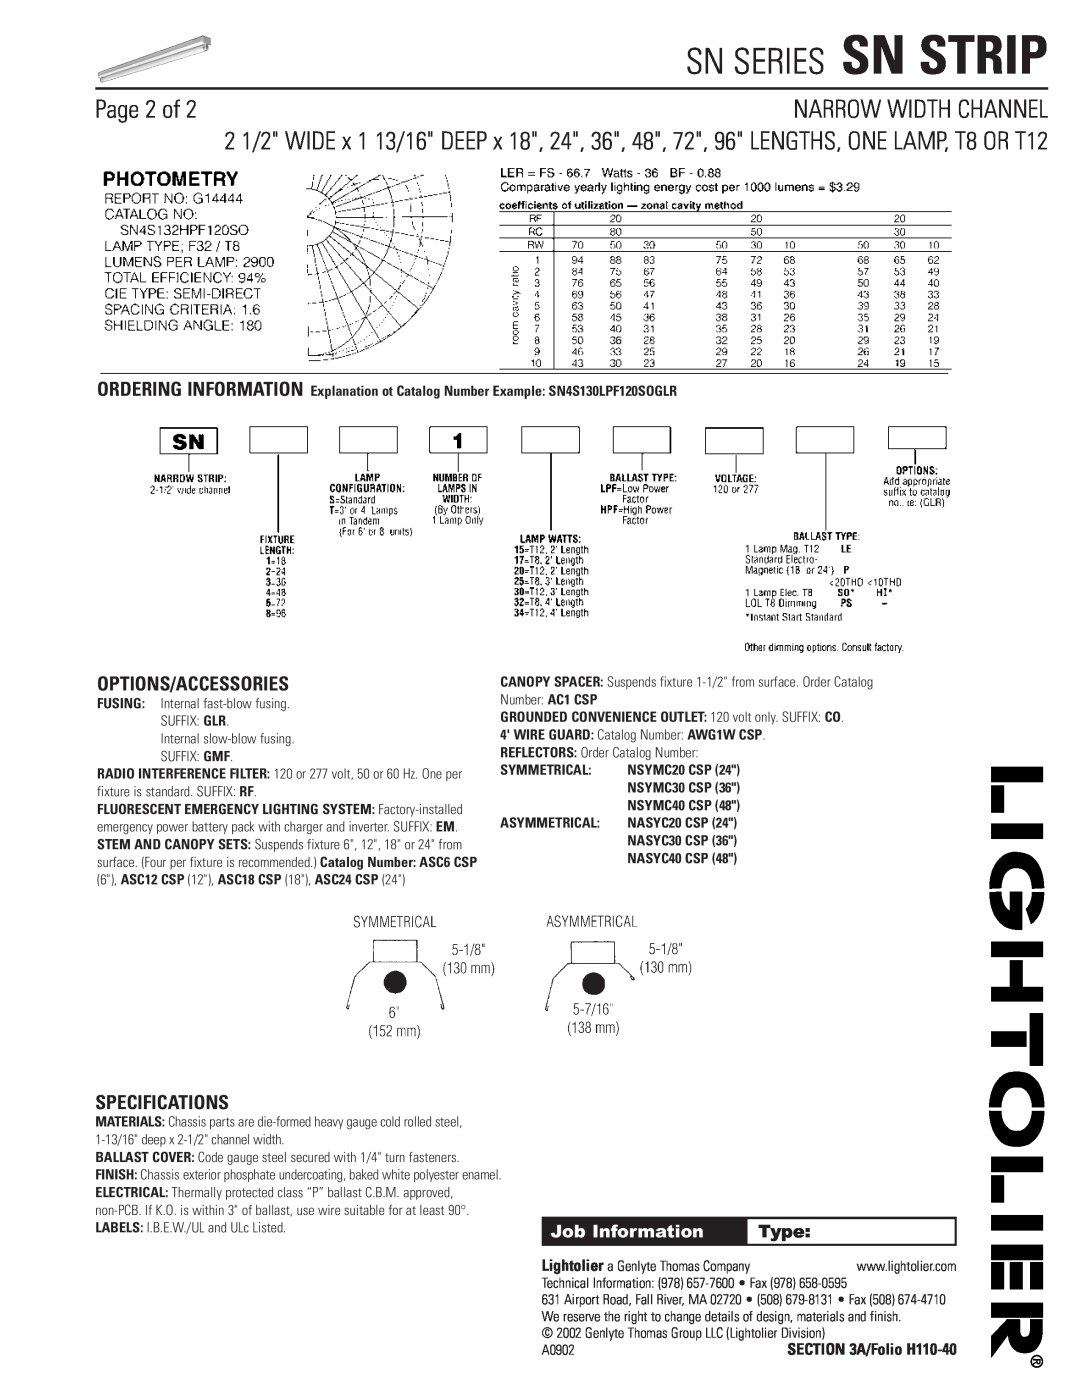 Lightolier SN STRIP Page 2 of, Options/Accessories, Specifications, Sn Series Sn Strip, Narrow Width Channel, Type 